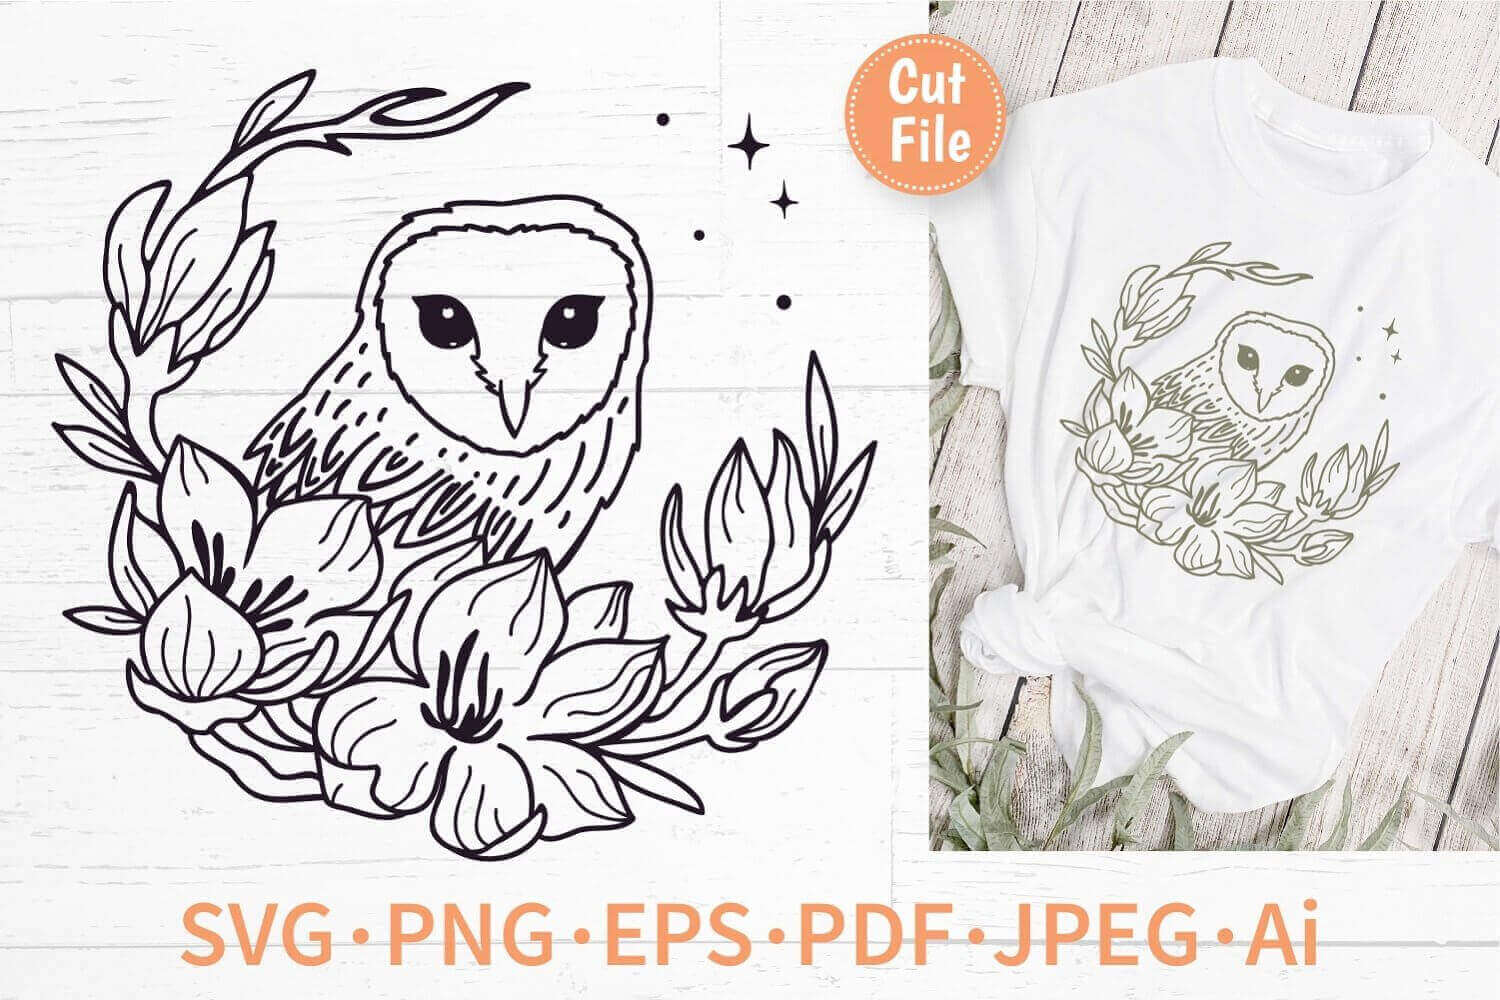 Decorative Owl SVG on the White Background.